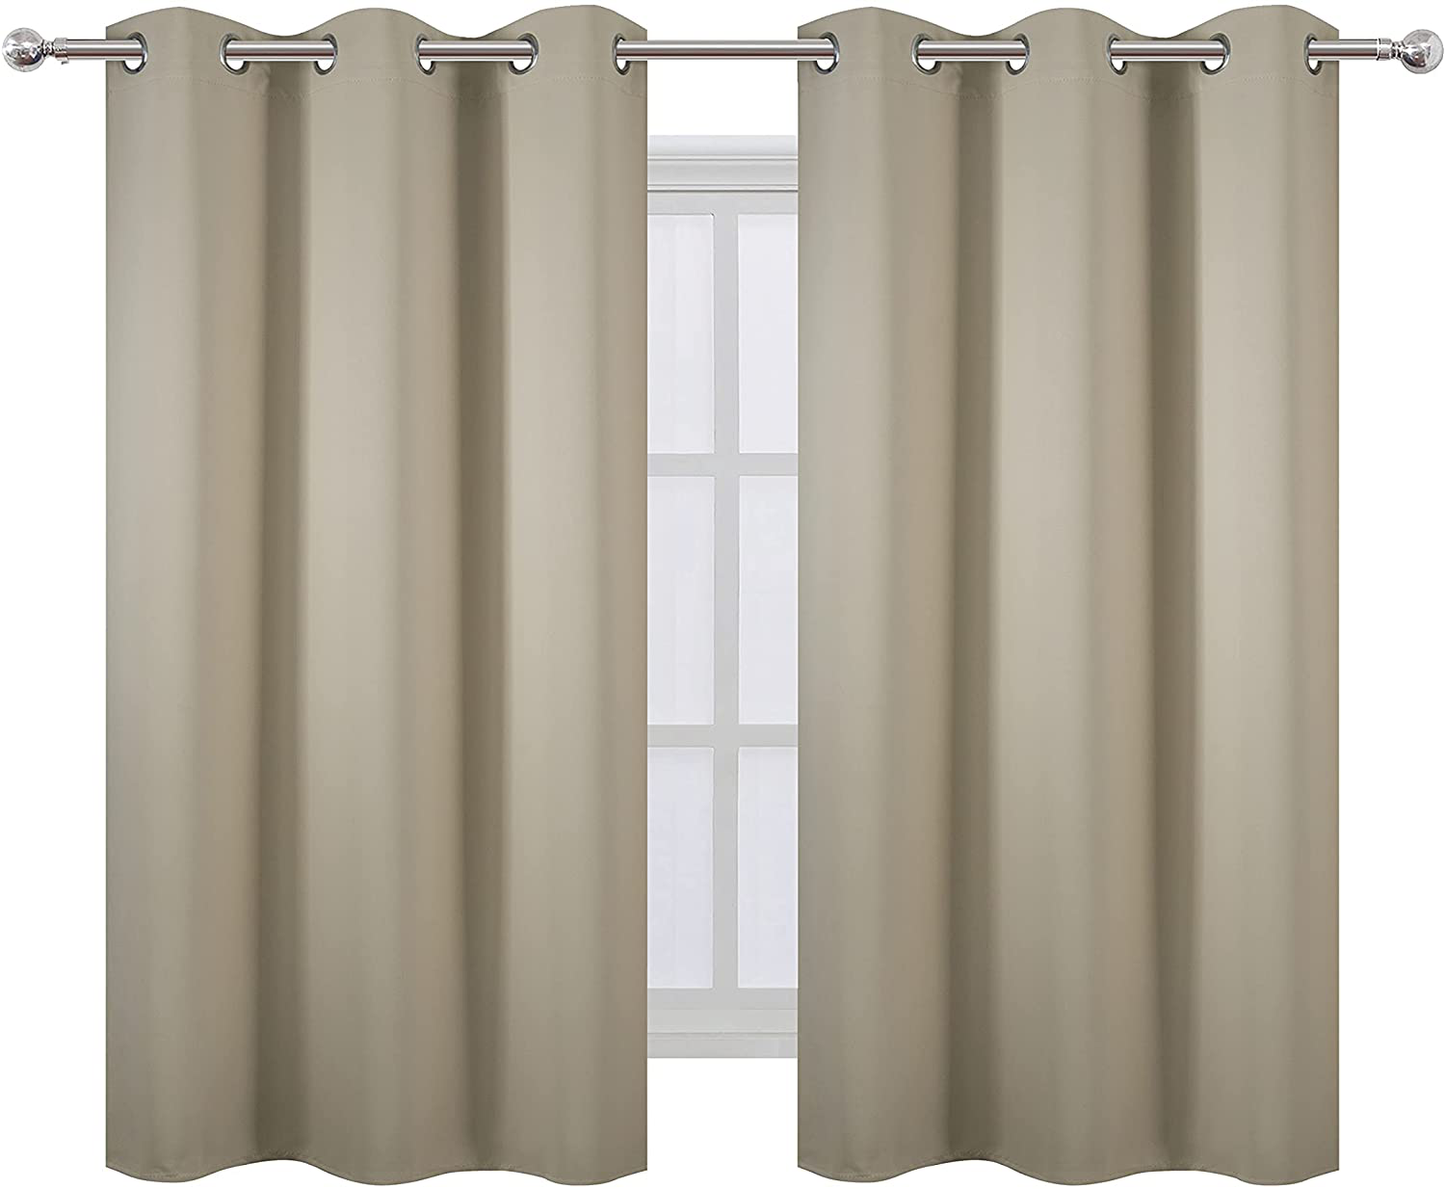 LEMOMO Chocolate Brown Thermal Blackout Curtains/52 x 54 Inch/Set of 2 Panels Room Darkening Curtains for Bedroom